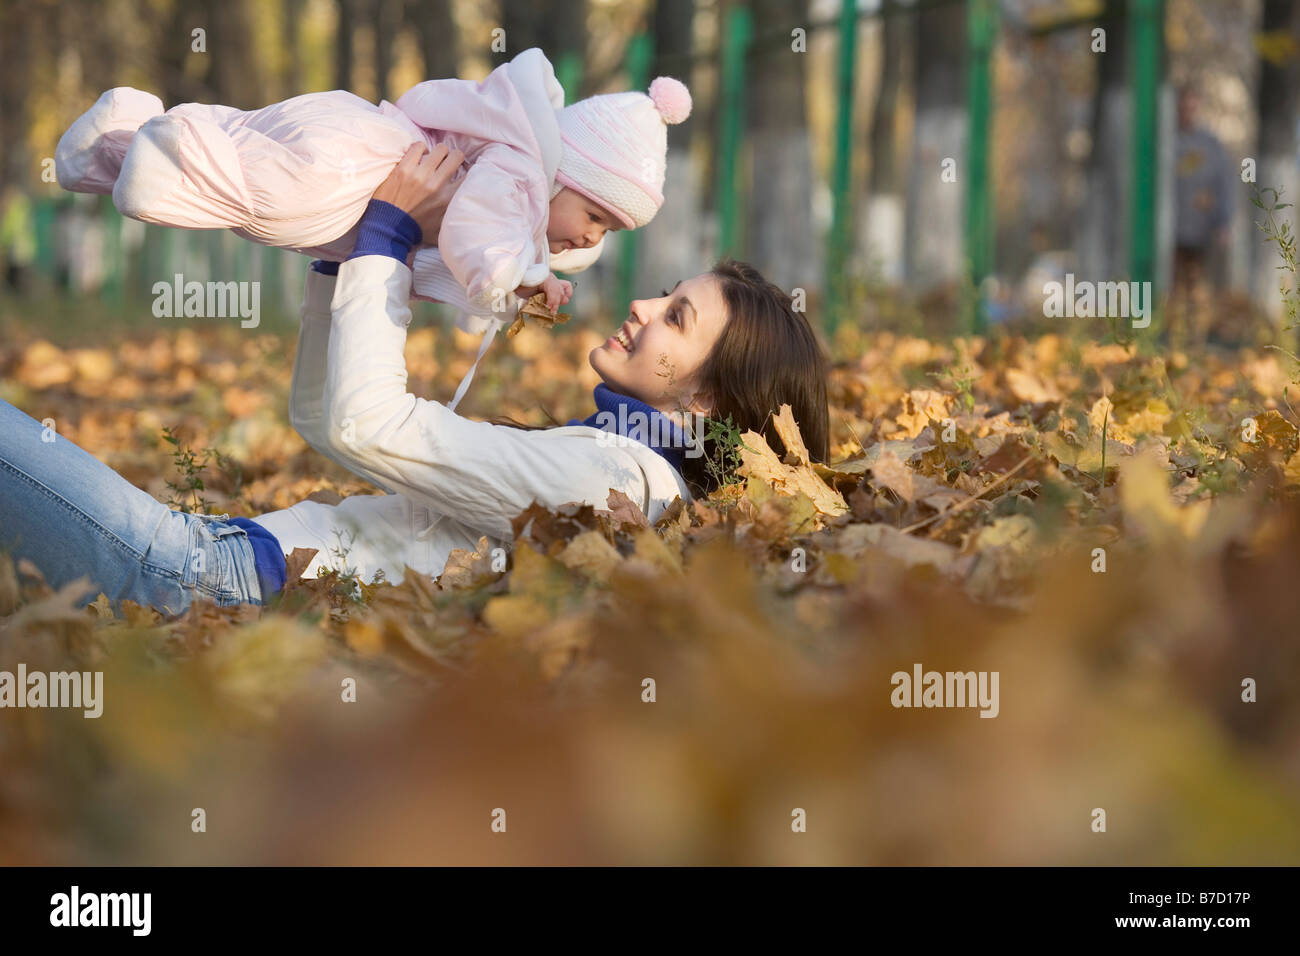 A teenage girl lying down lifting a baby up Stock Photo